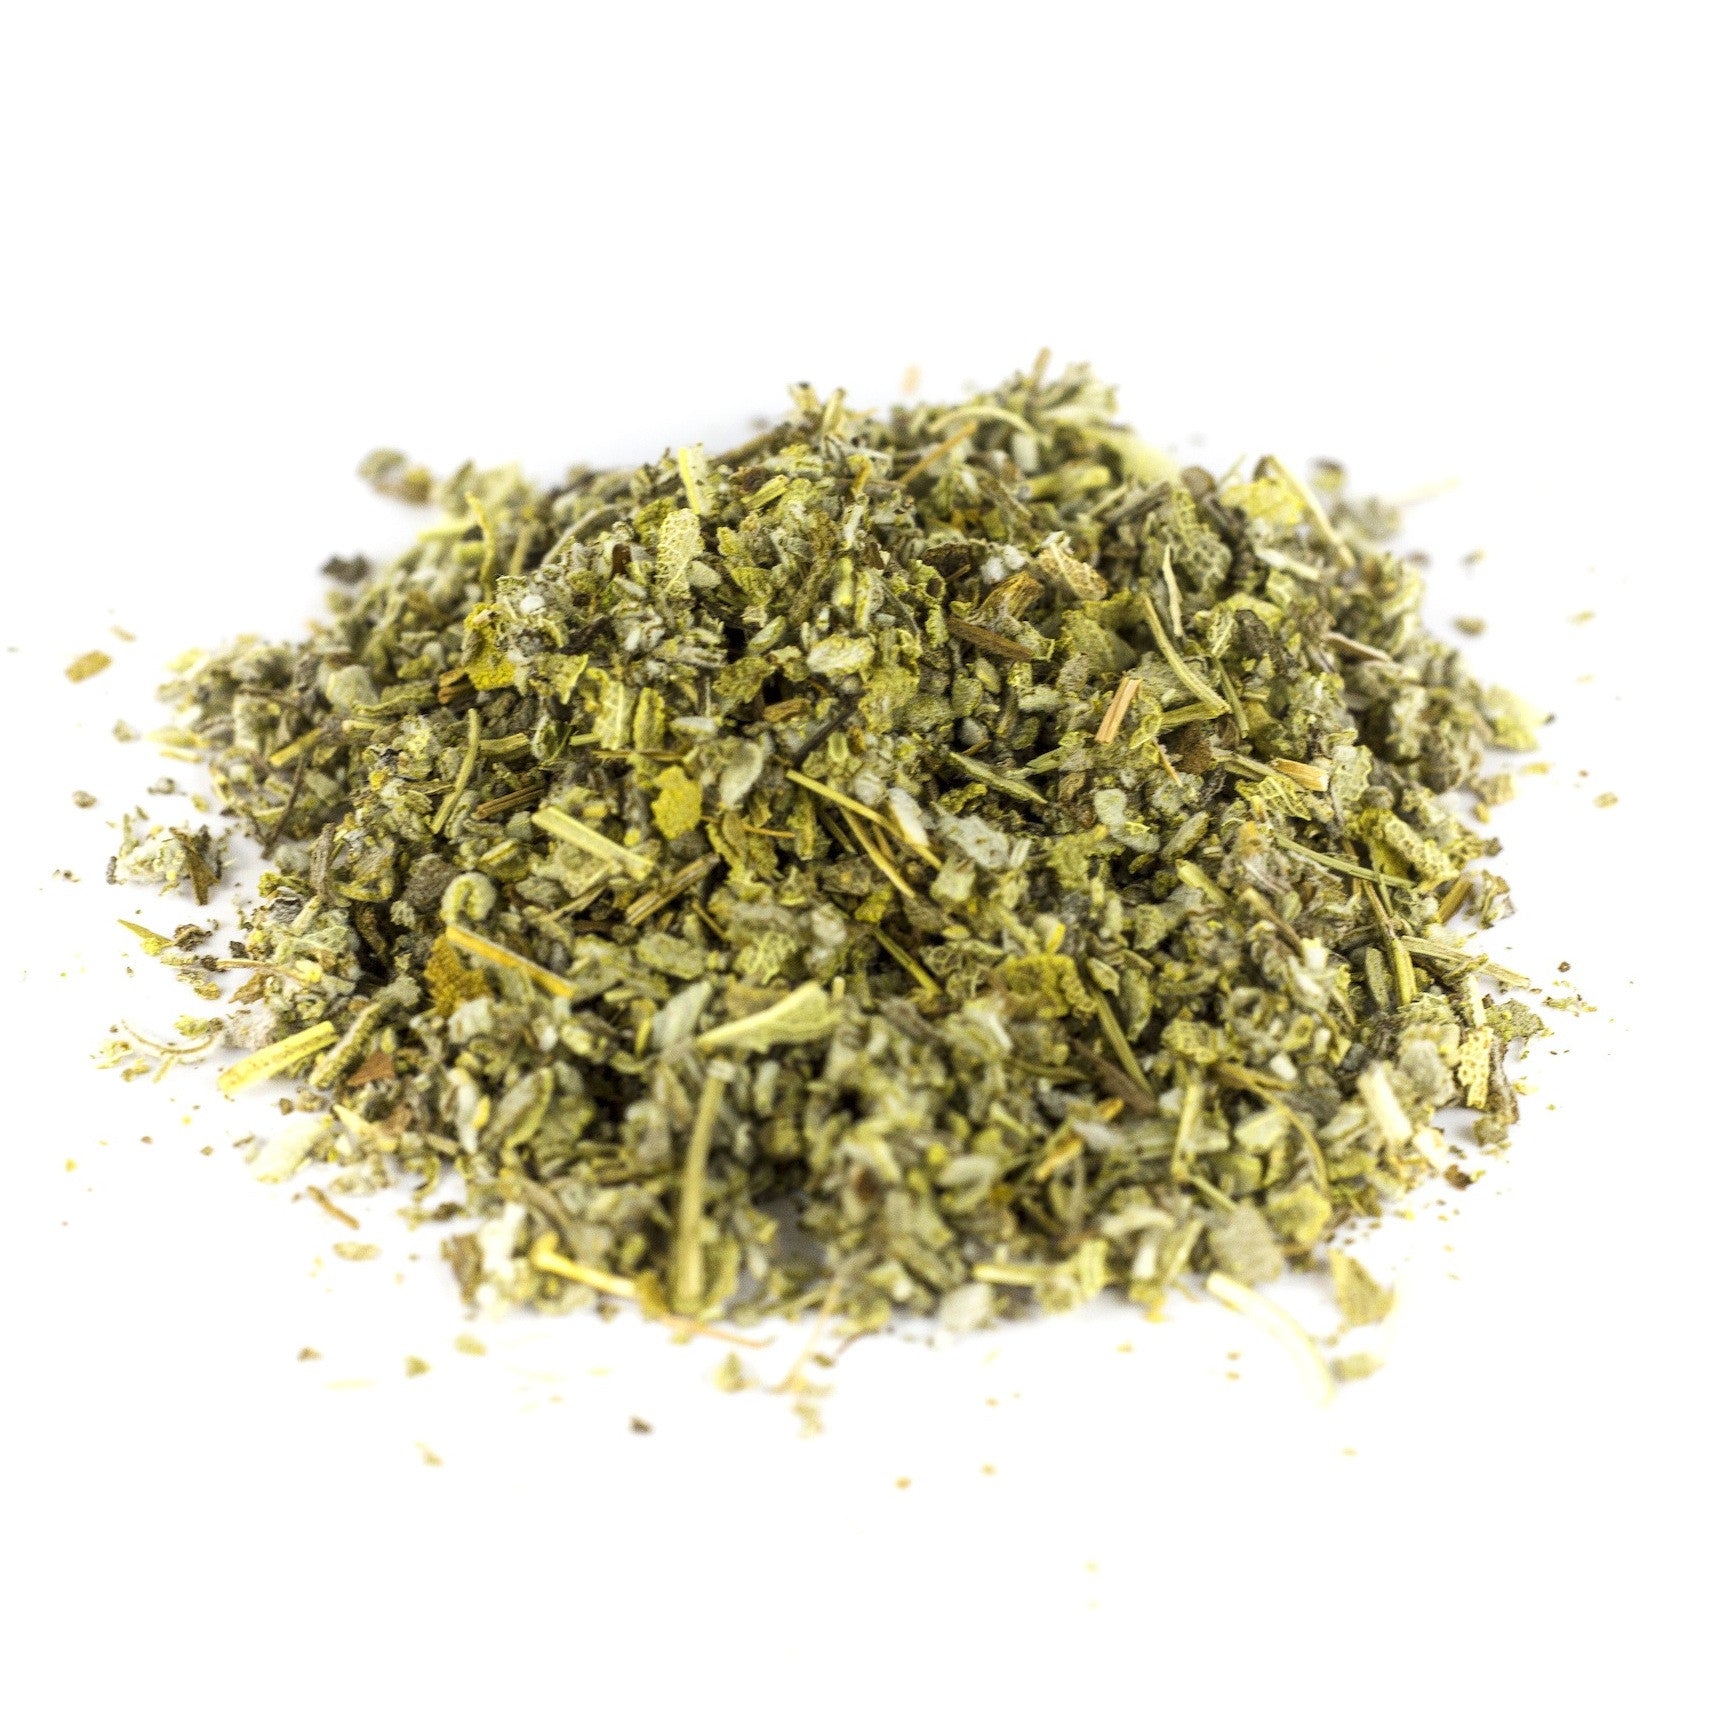 Sage Leaf- Rubbed - Red Stick Spice Company